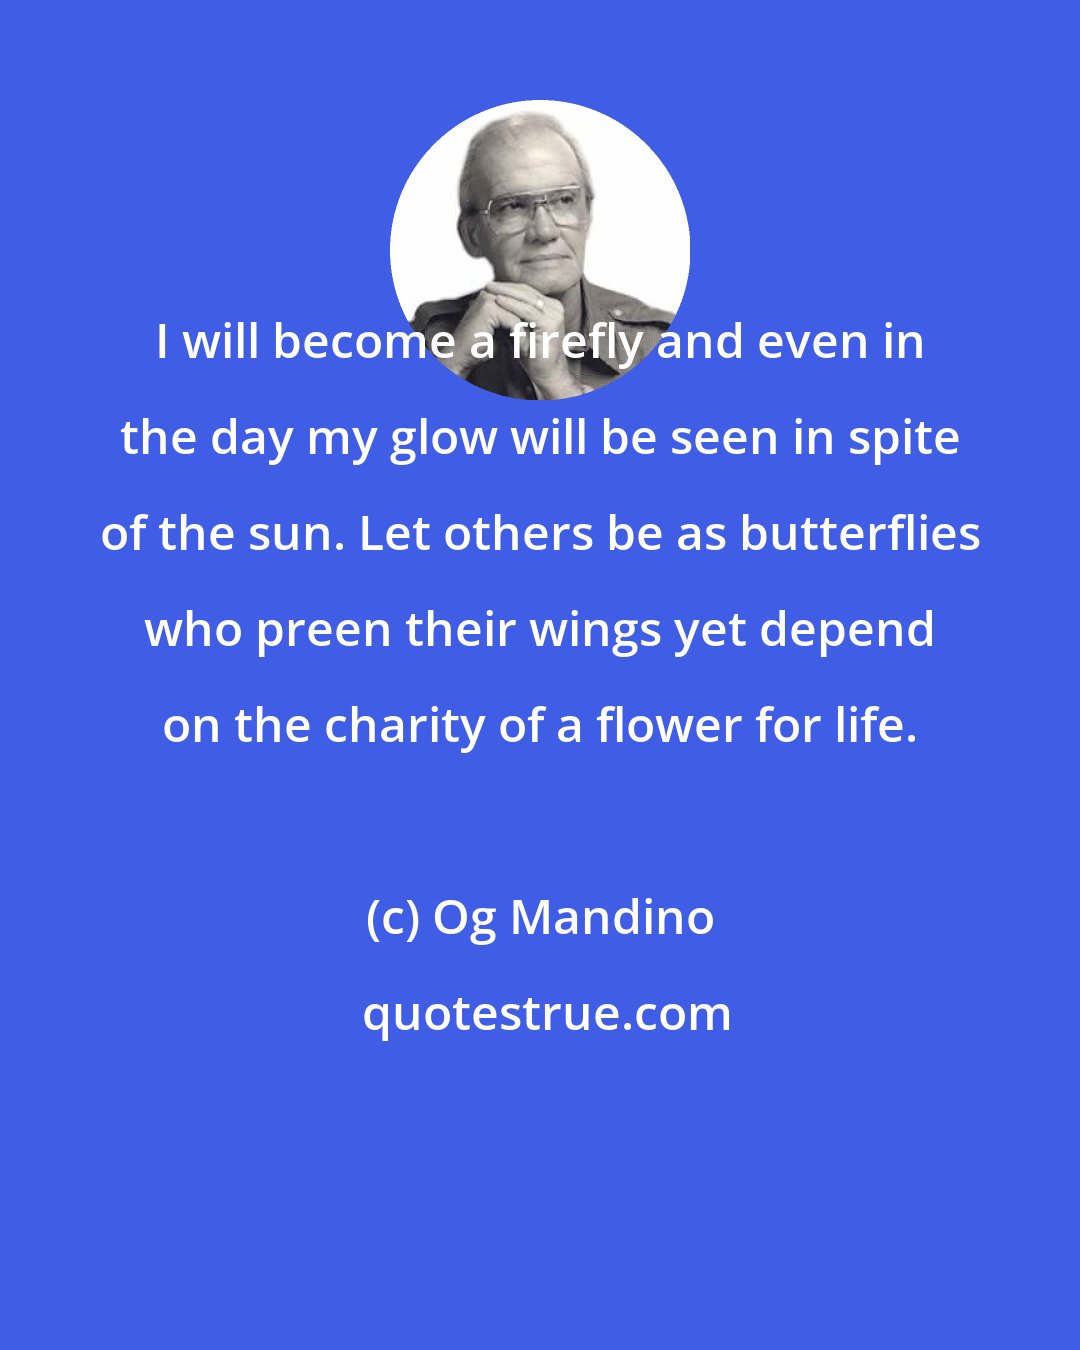 Og Mandino: I will become a firefly and even in the day my glow will be seen in spite of the sun. Let others be as butterflies who preen their wings yet depend on the charity of a flower for life.